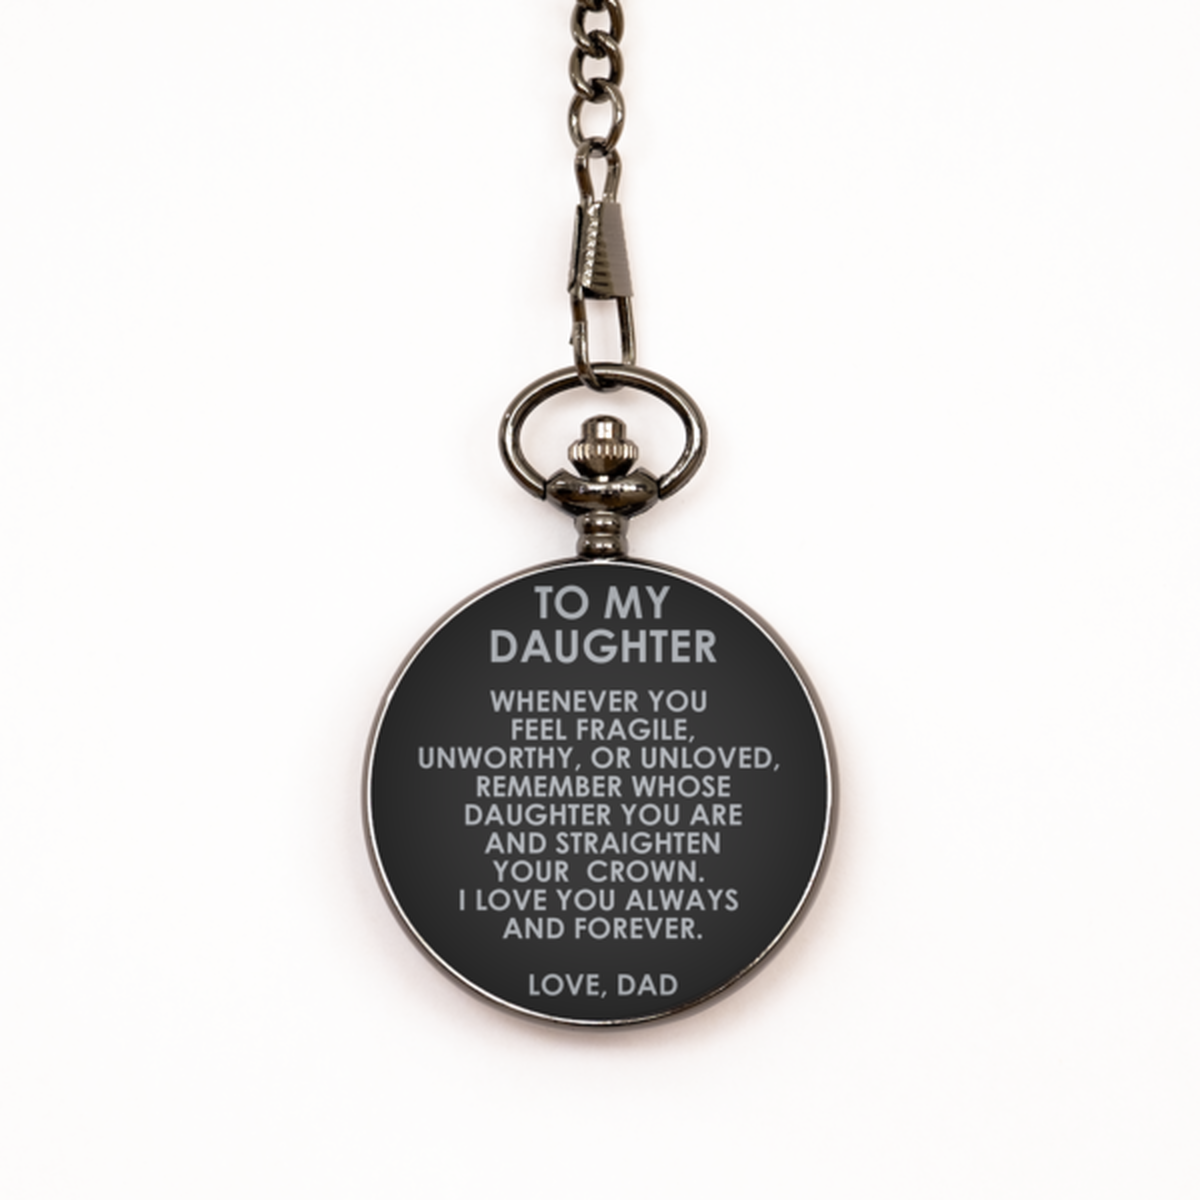 To My Daughter Black Pocket Watch, I Love You Always And Forever, Birthday Gifts For Daughter From Dad, Christmas Gifts For Women